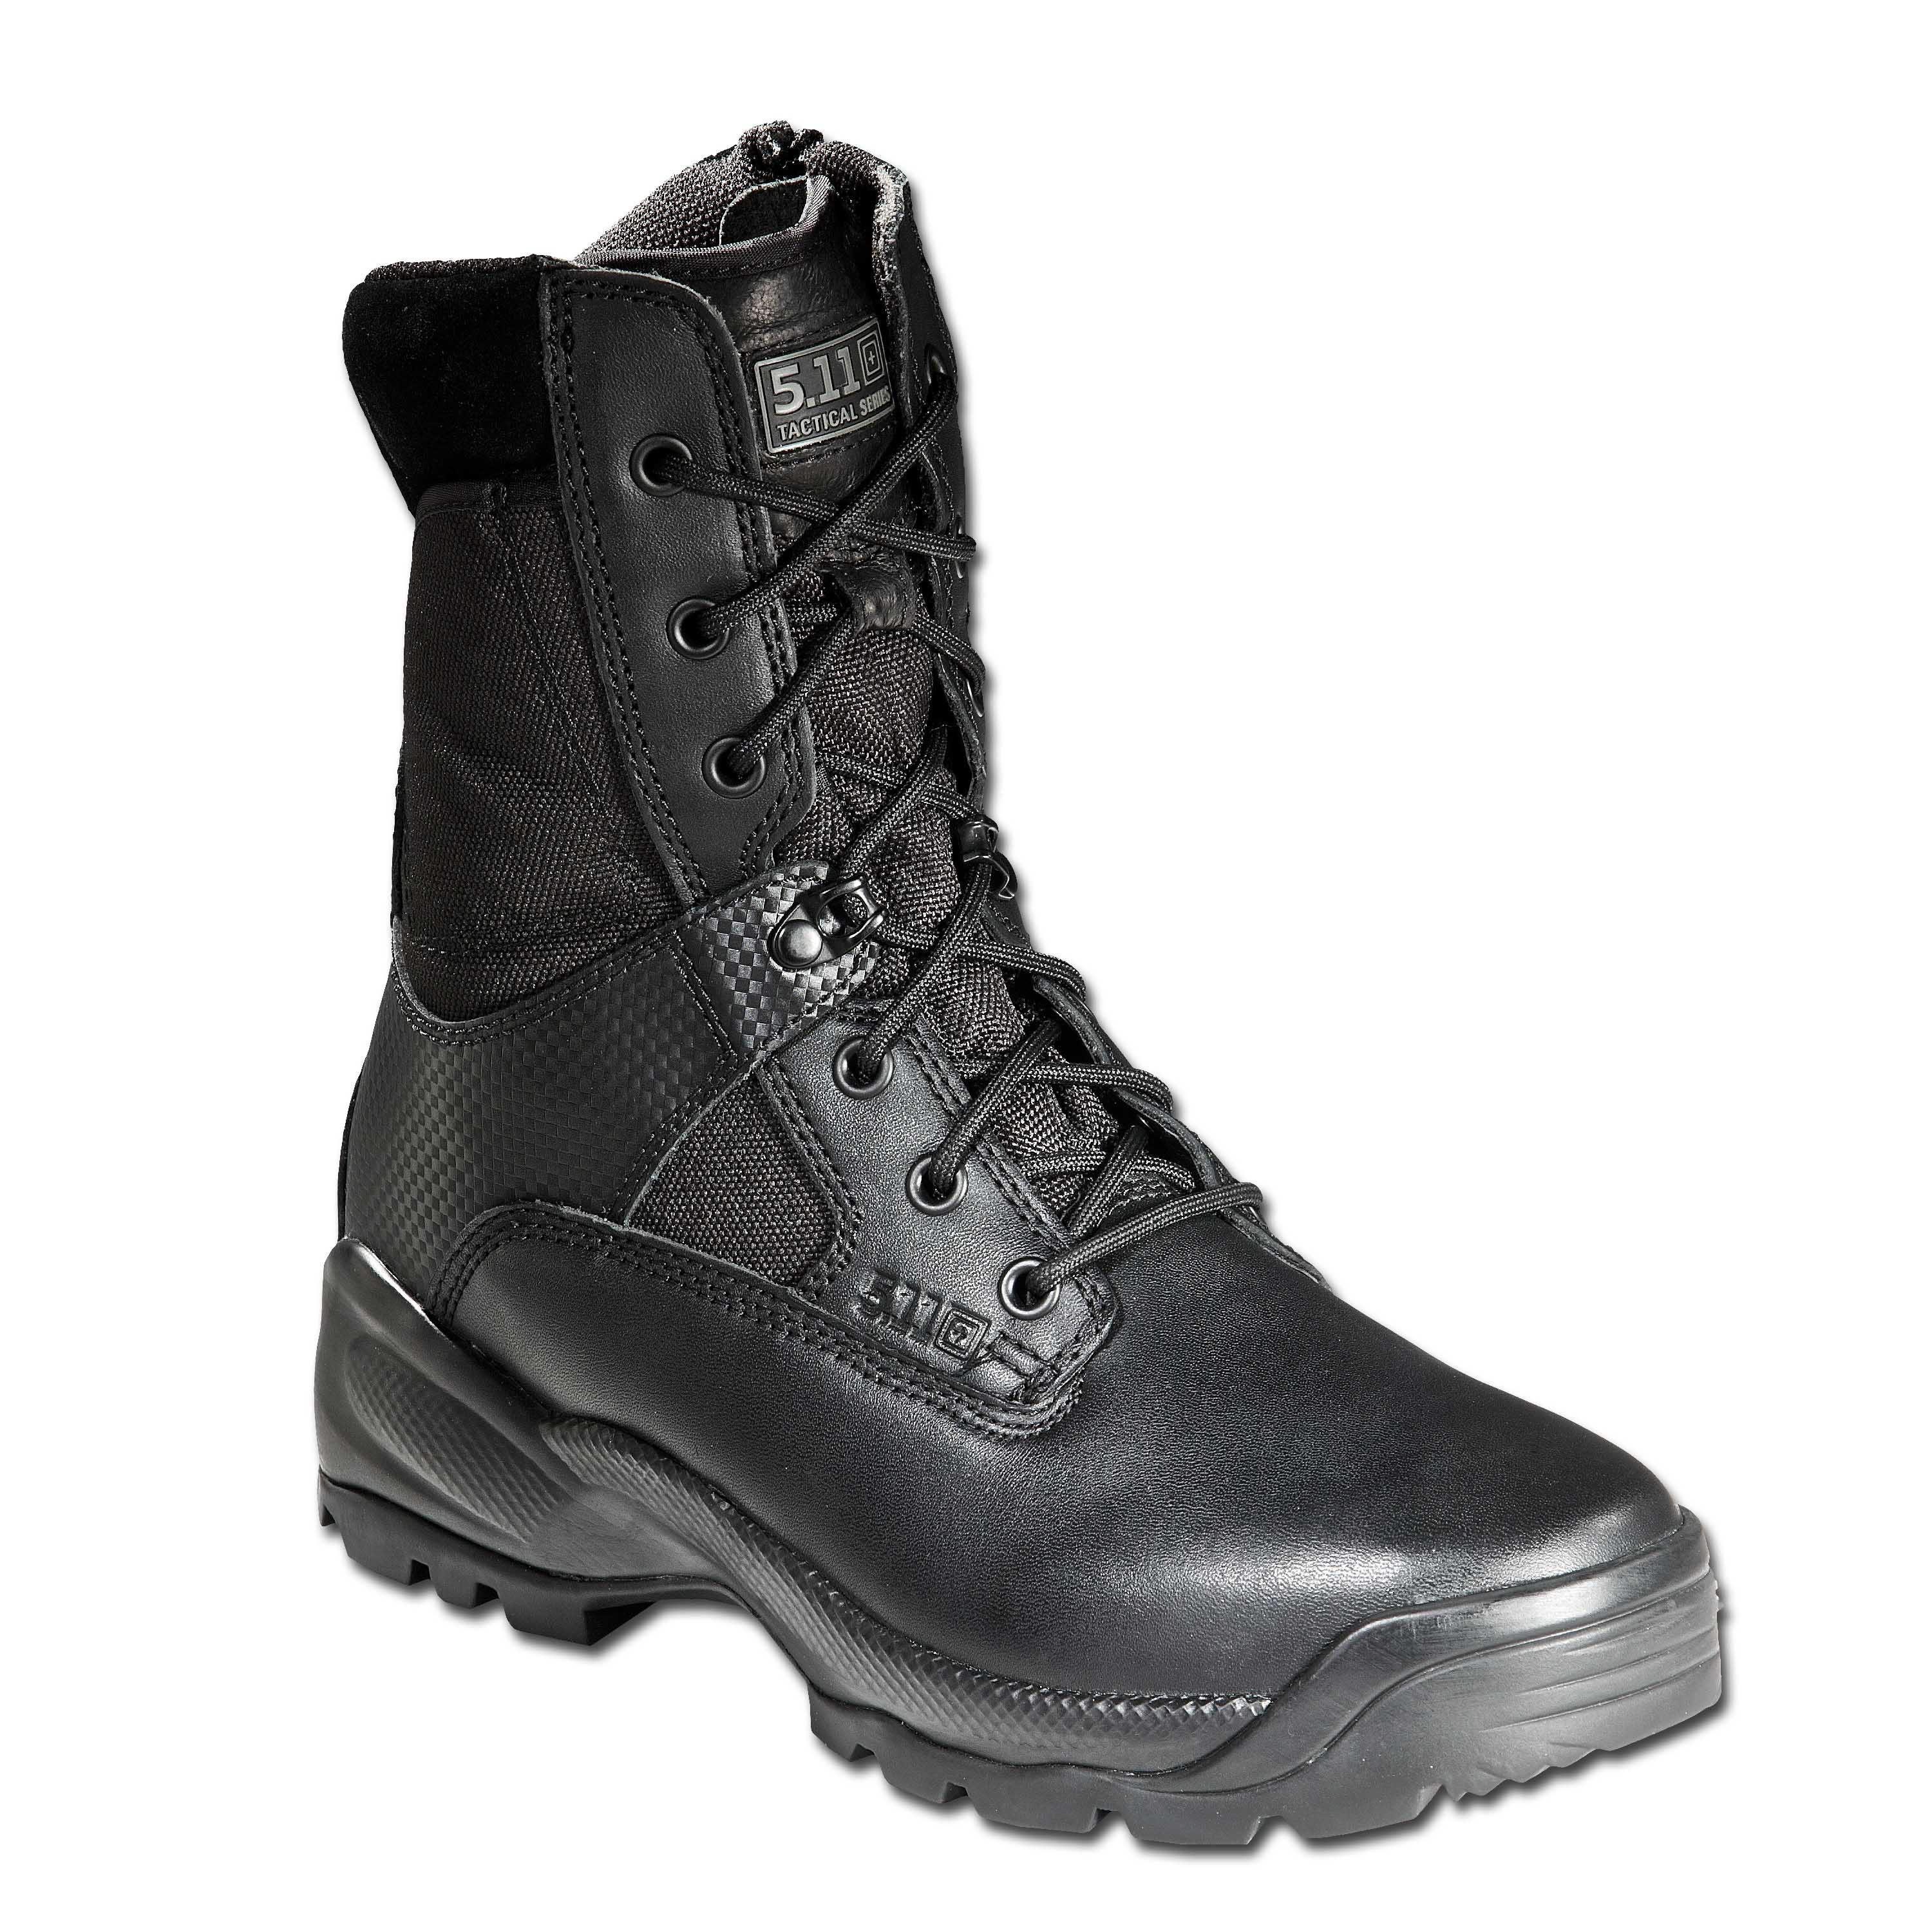 Purchase thre 5.11 ATAC Side Zip Boots black by ASMC